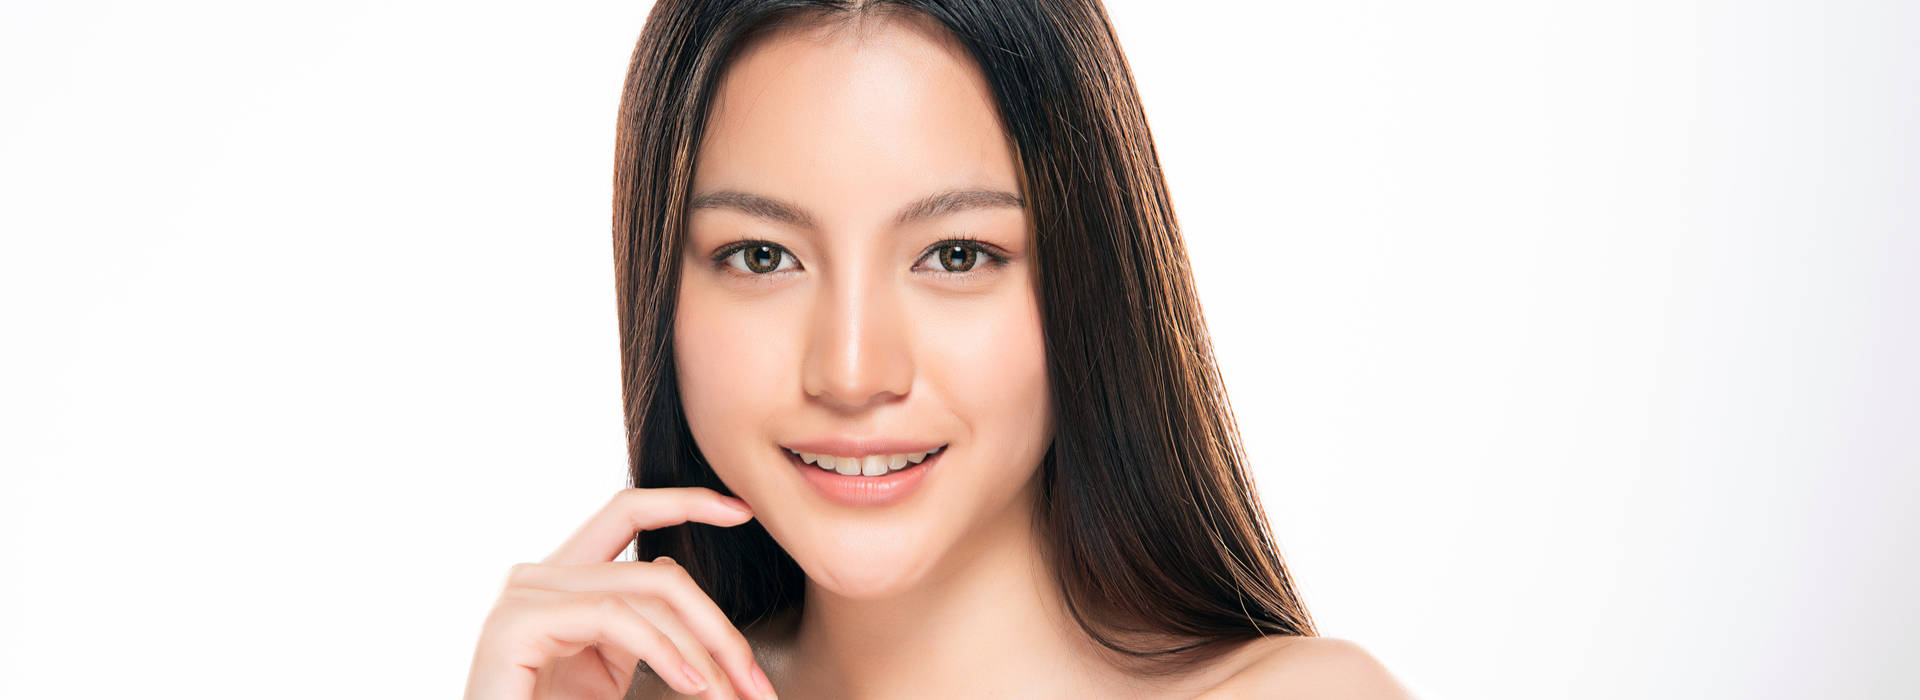 A beautiful woman is smiling after medical grade skin care.